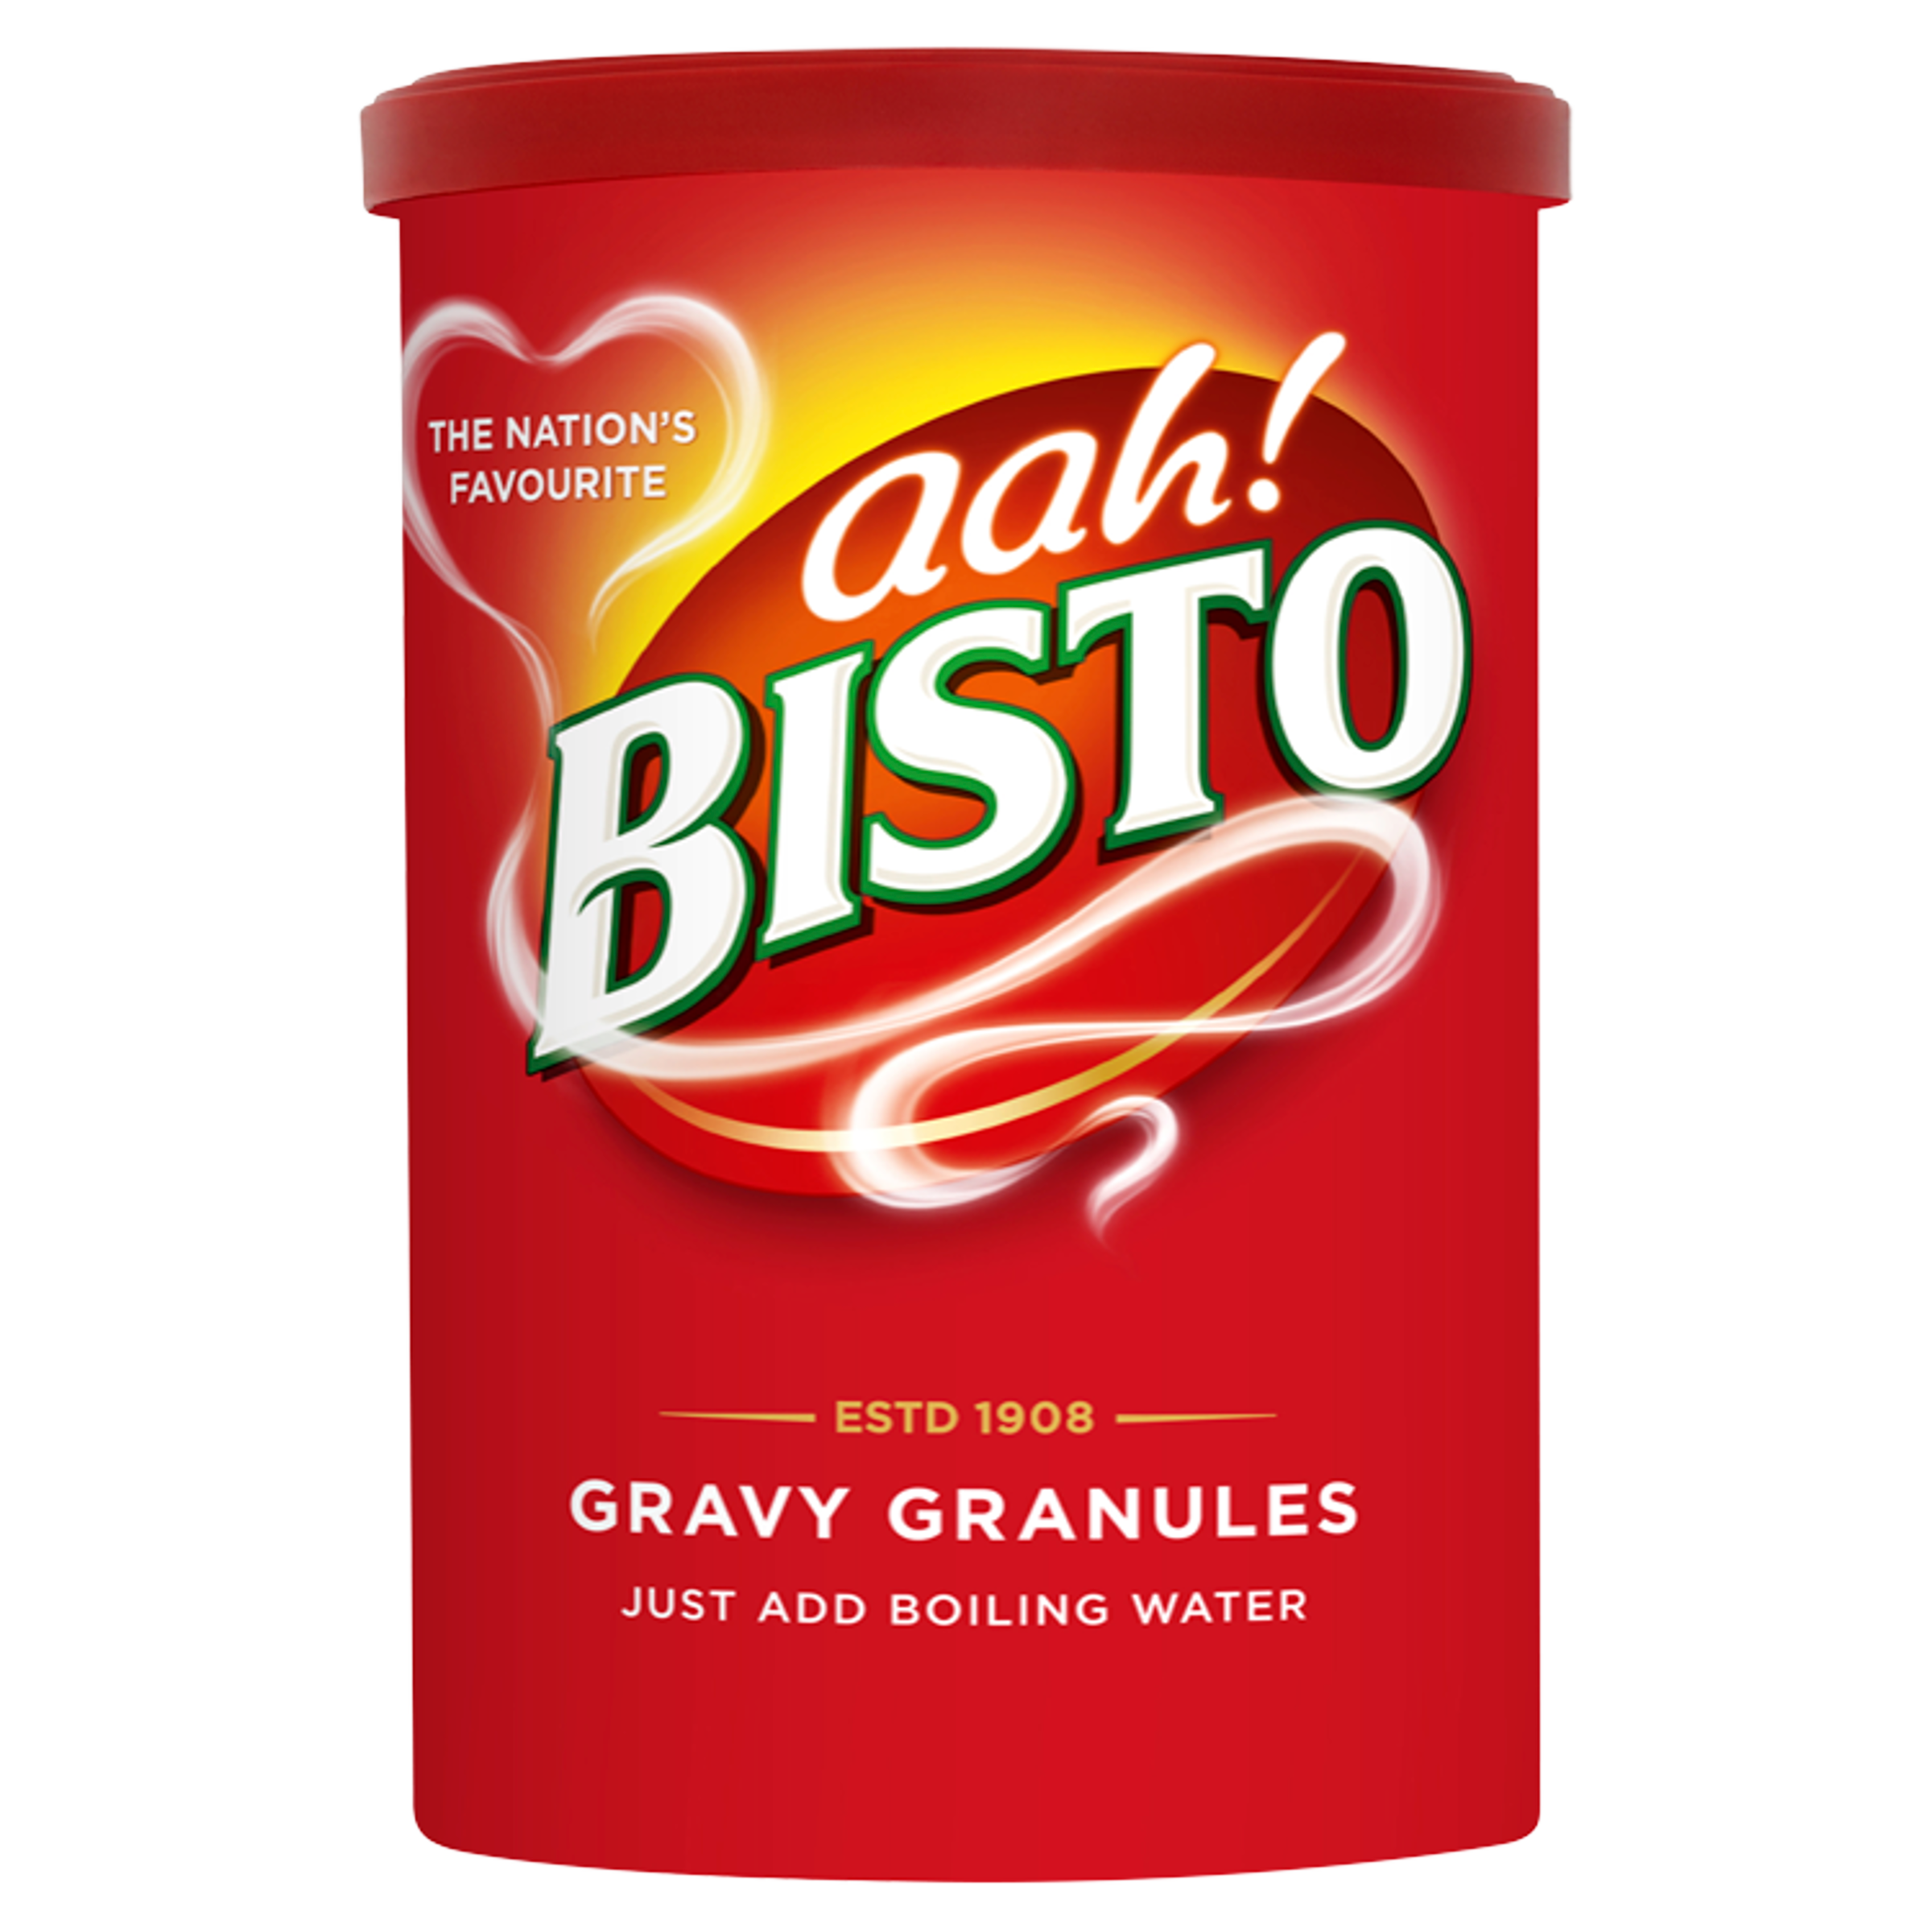 Premier Foods removes 40 tonnes of packaging from Bisto